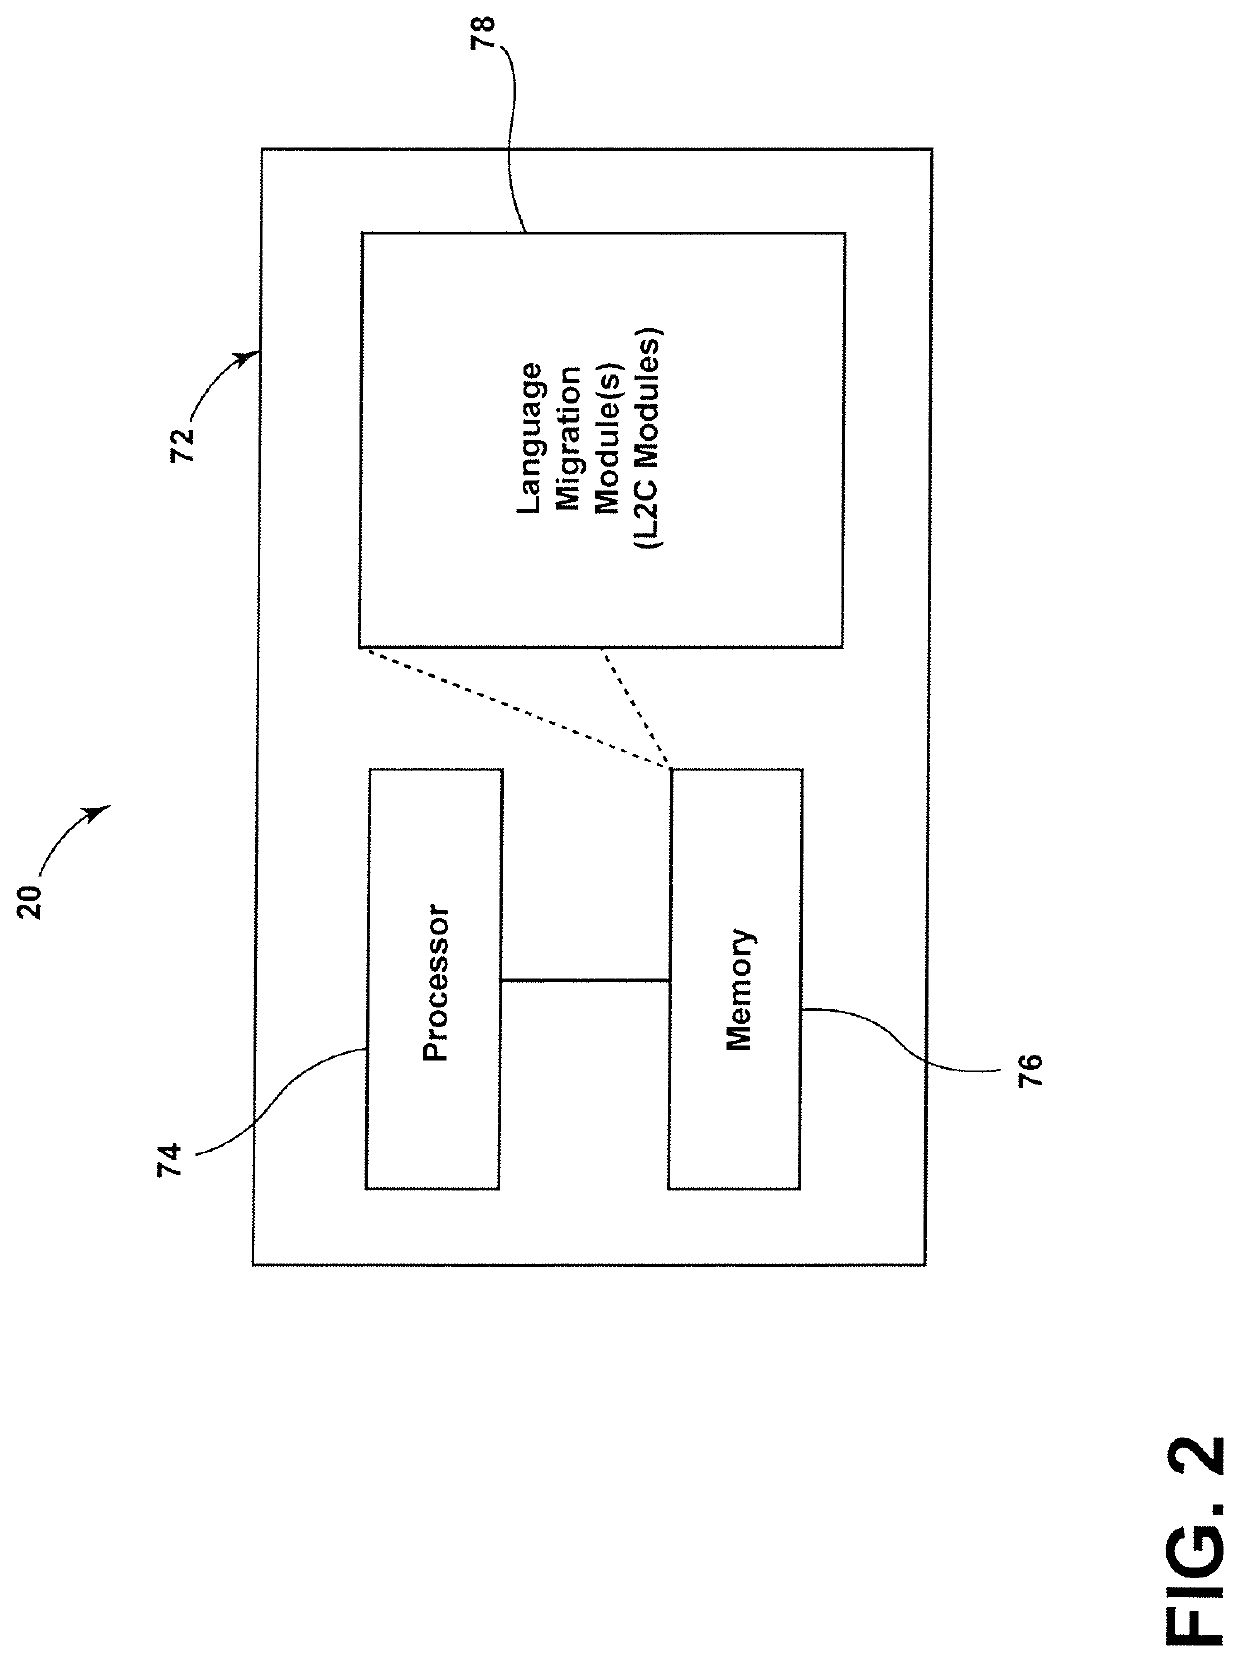 System and method for computer language migration using a re-architecture tool for decomposing a legacy system and recomposing a modernized system